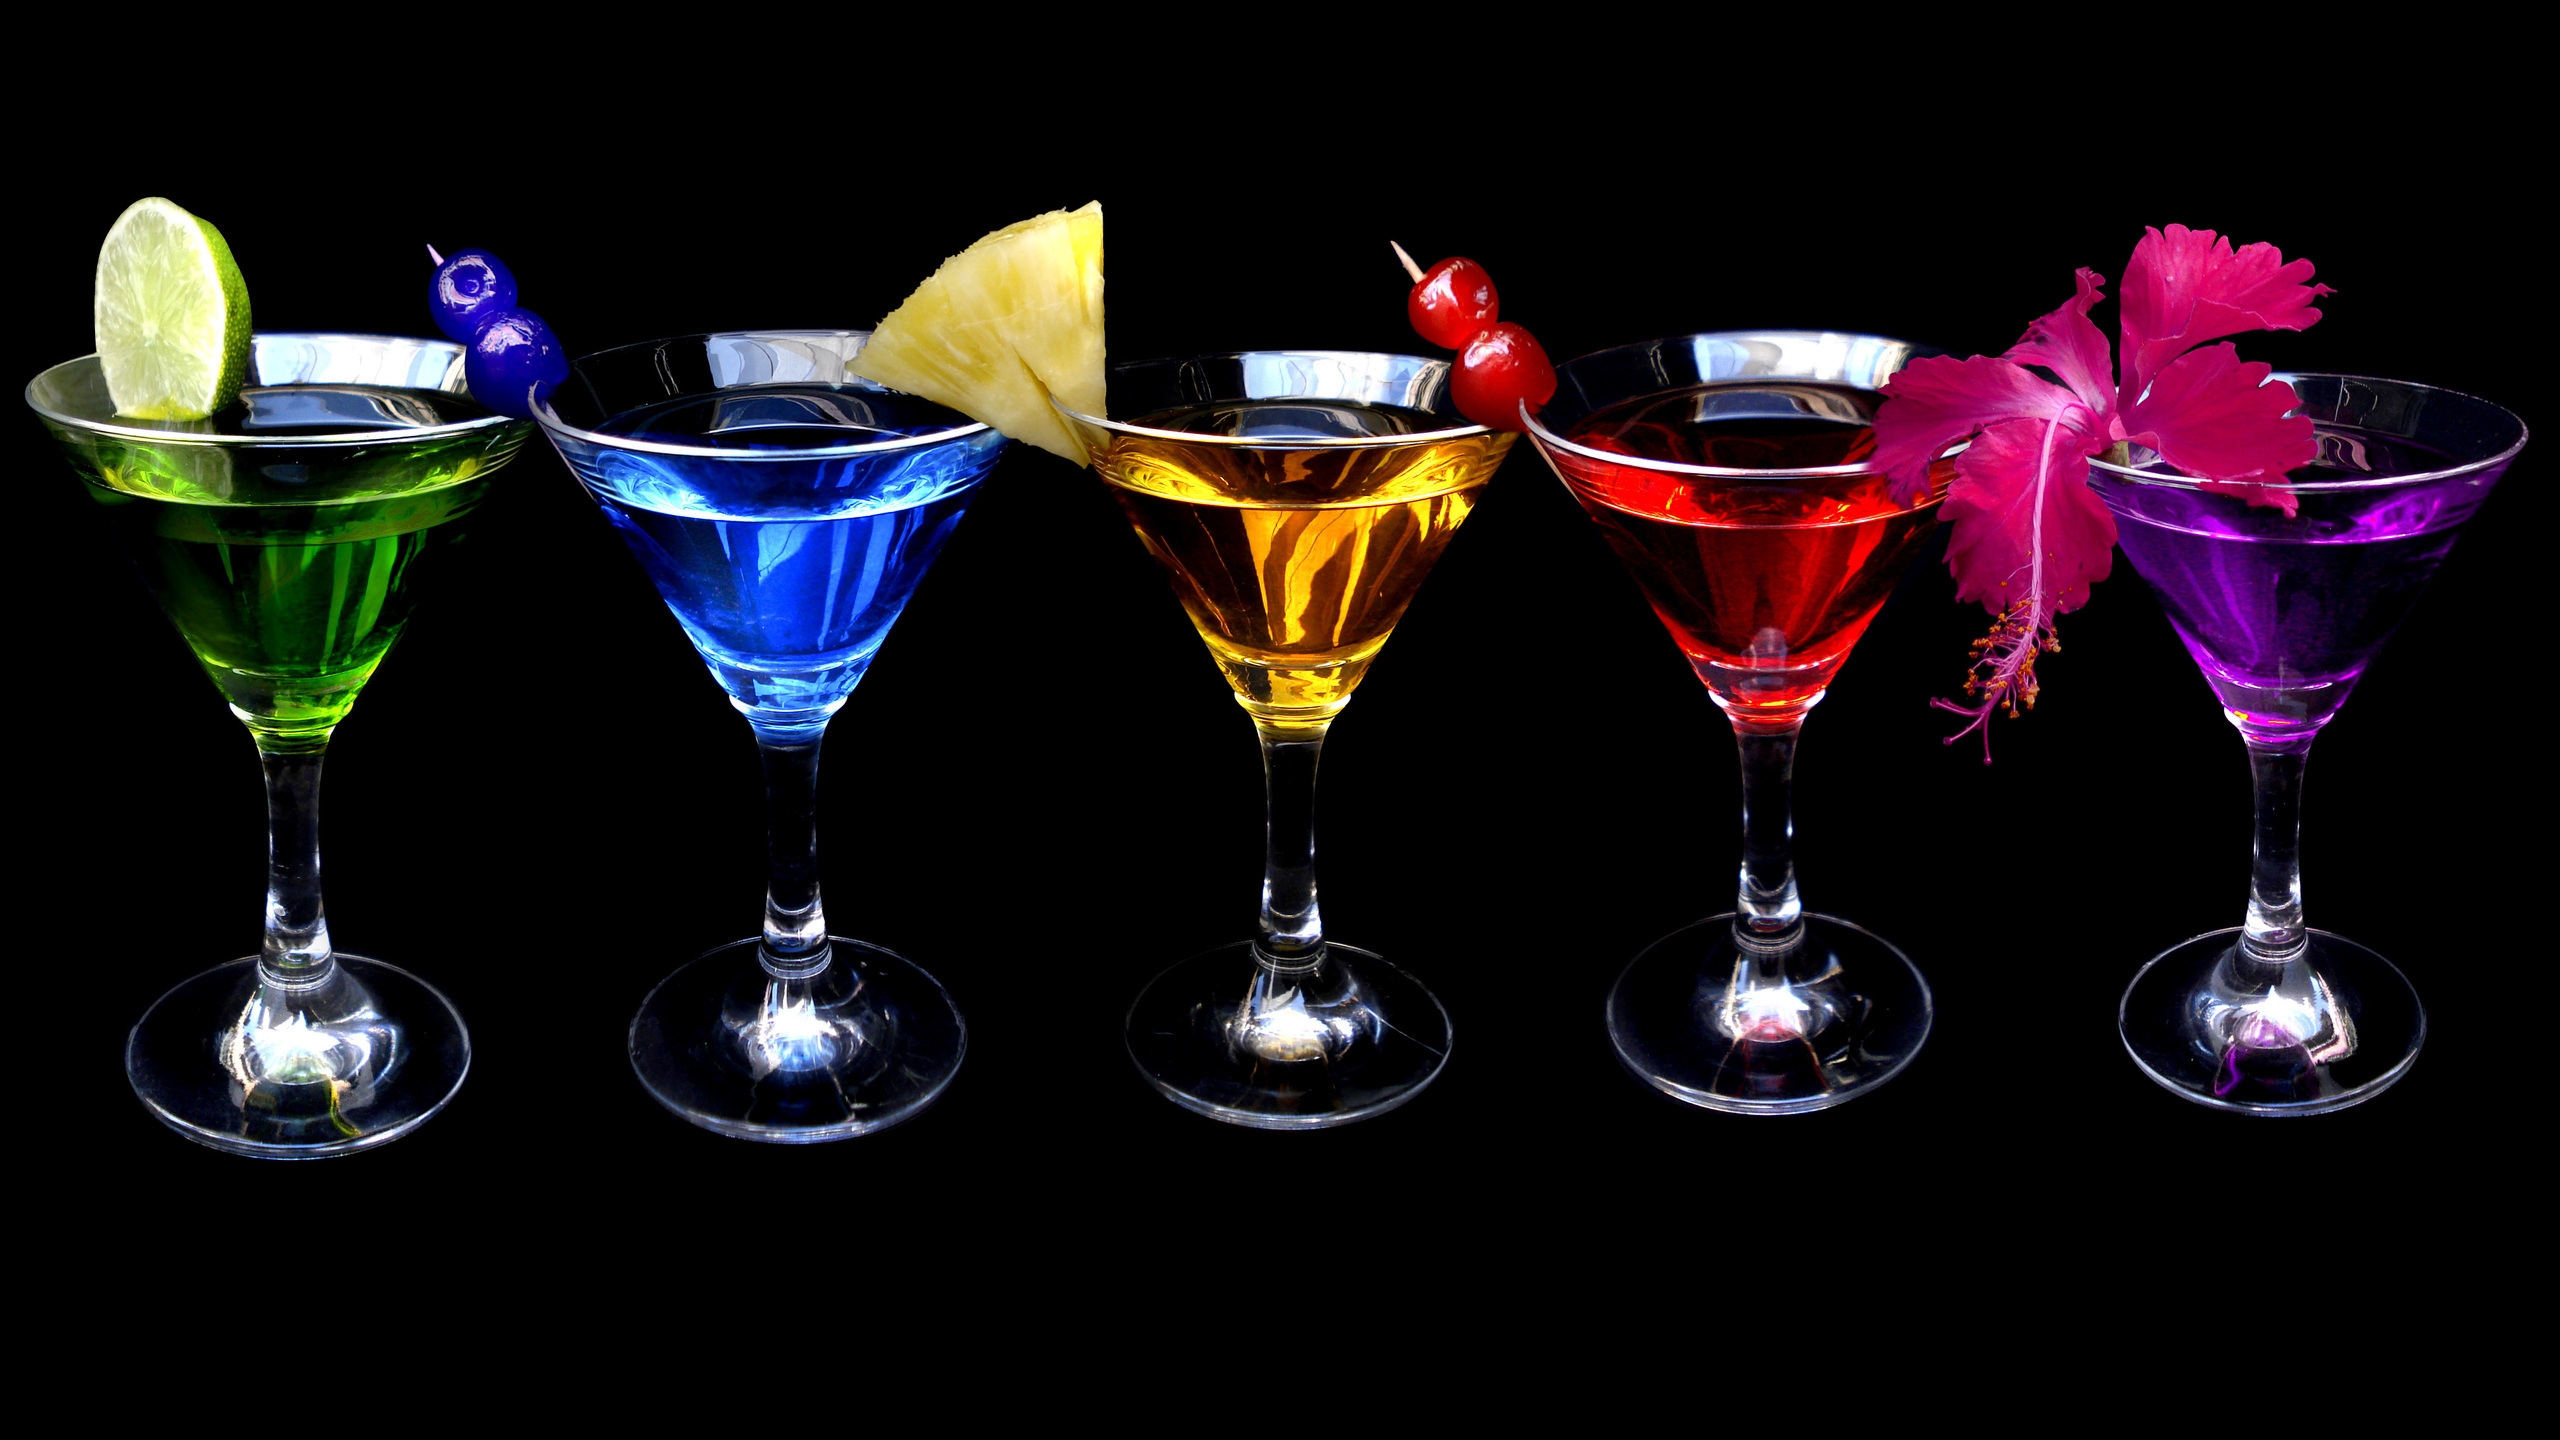 New Summer Cocktails for 2560x1440 HDTV resolution